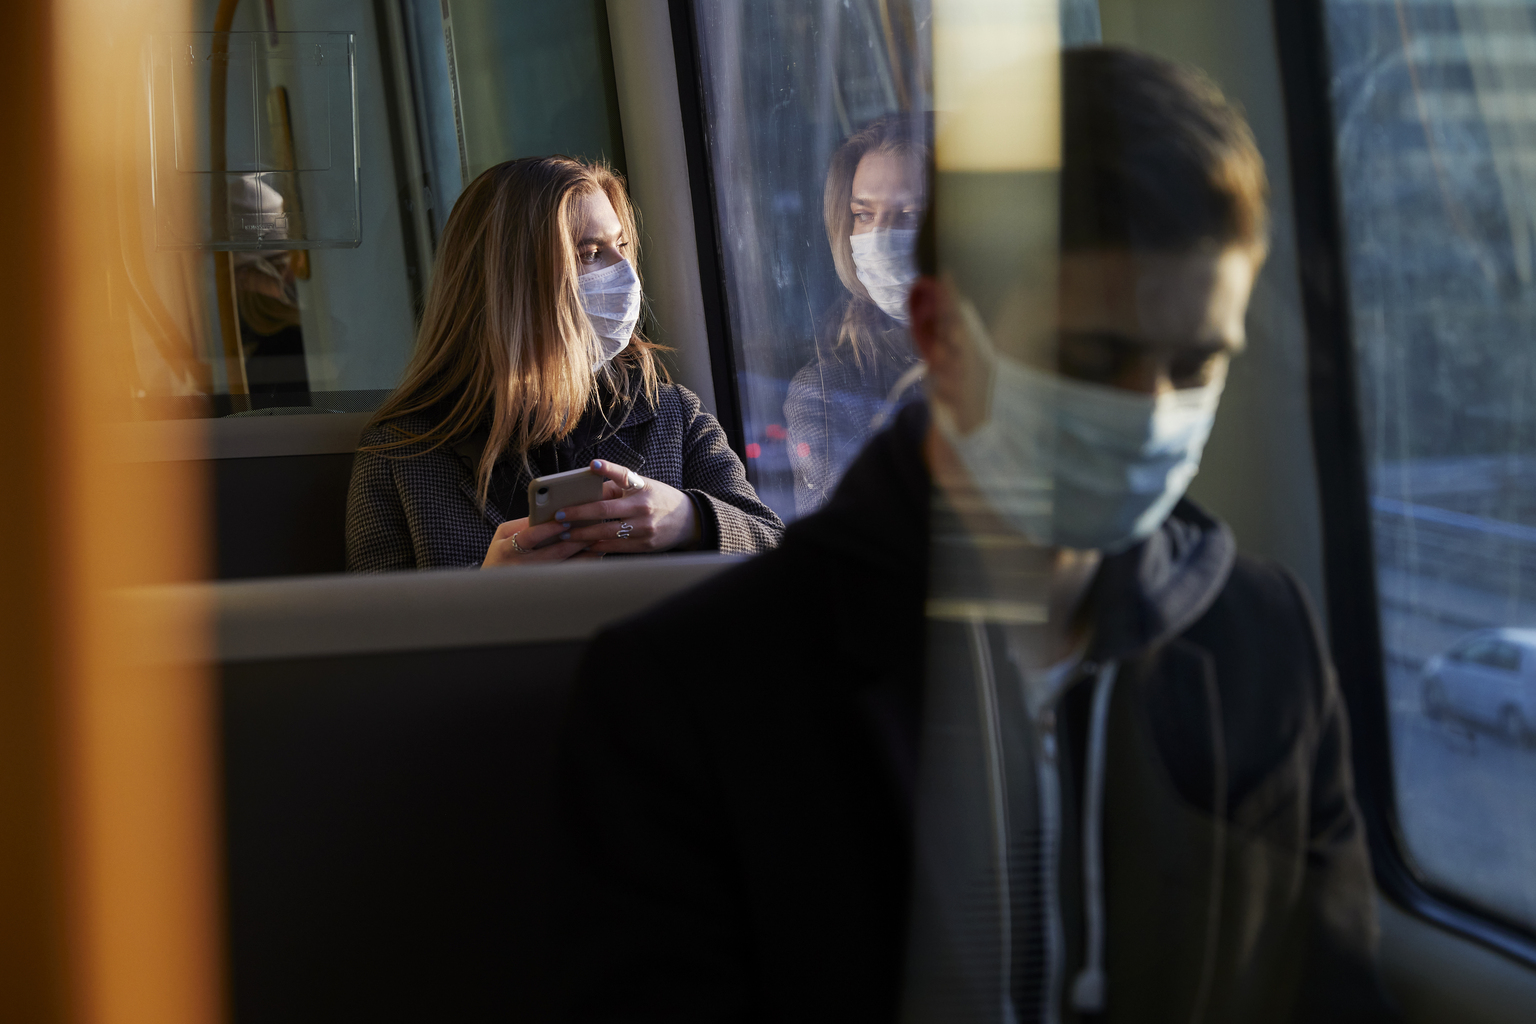 People in public transport wearing mask while commuting